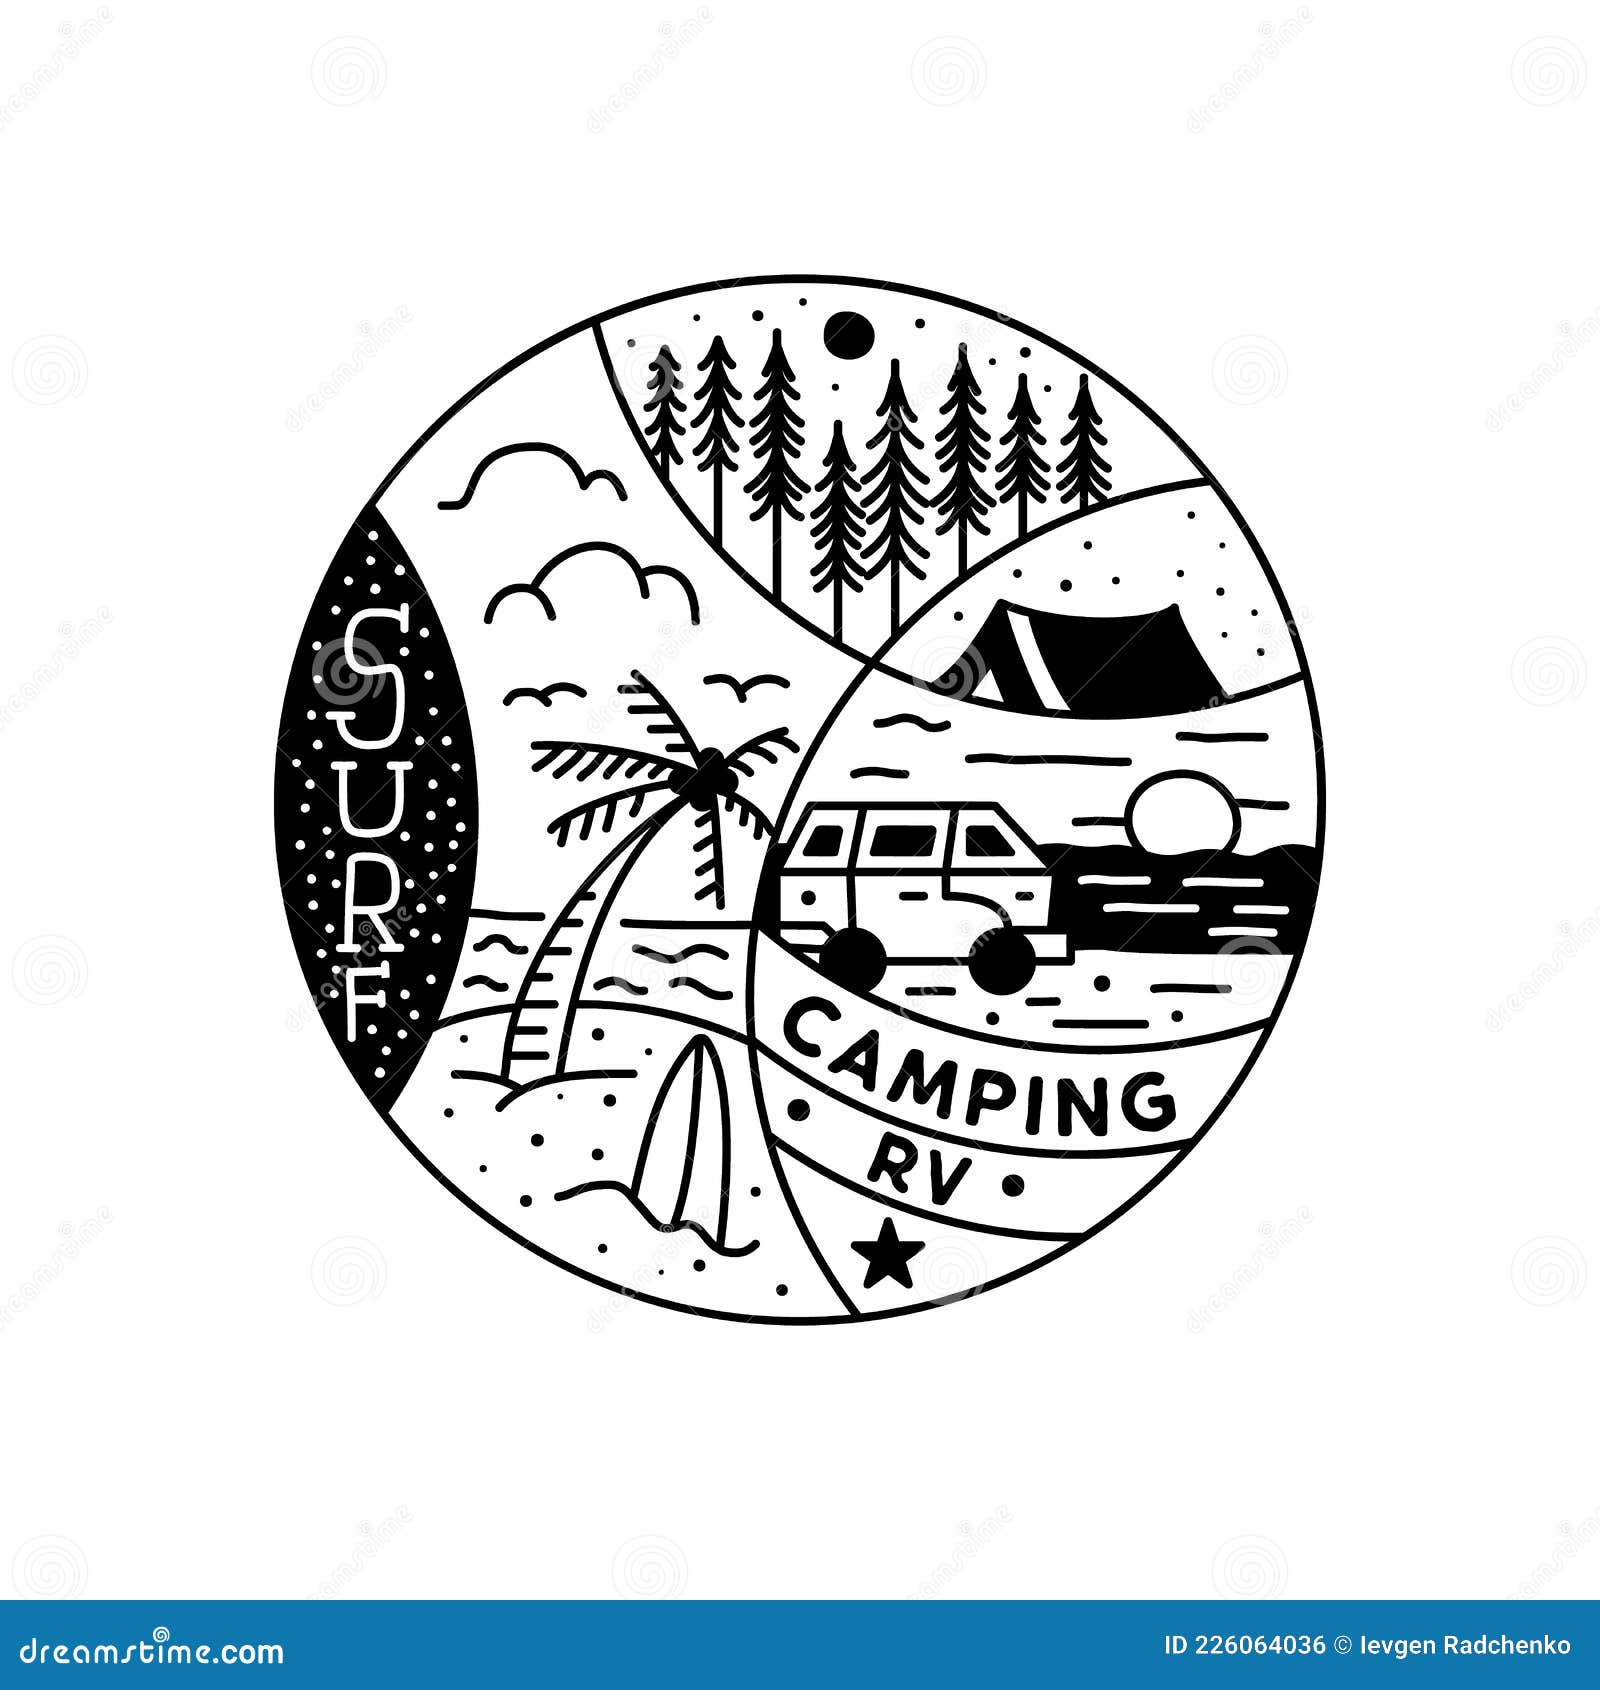 Camping Adventure Tattoo Design. Summer Surf Crest Logo with Beach and  Hiking Scene Stock Illustration - Illustration of hipster, emblem: 226064036